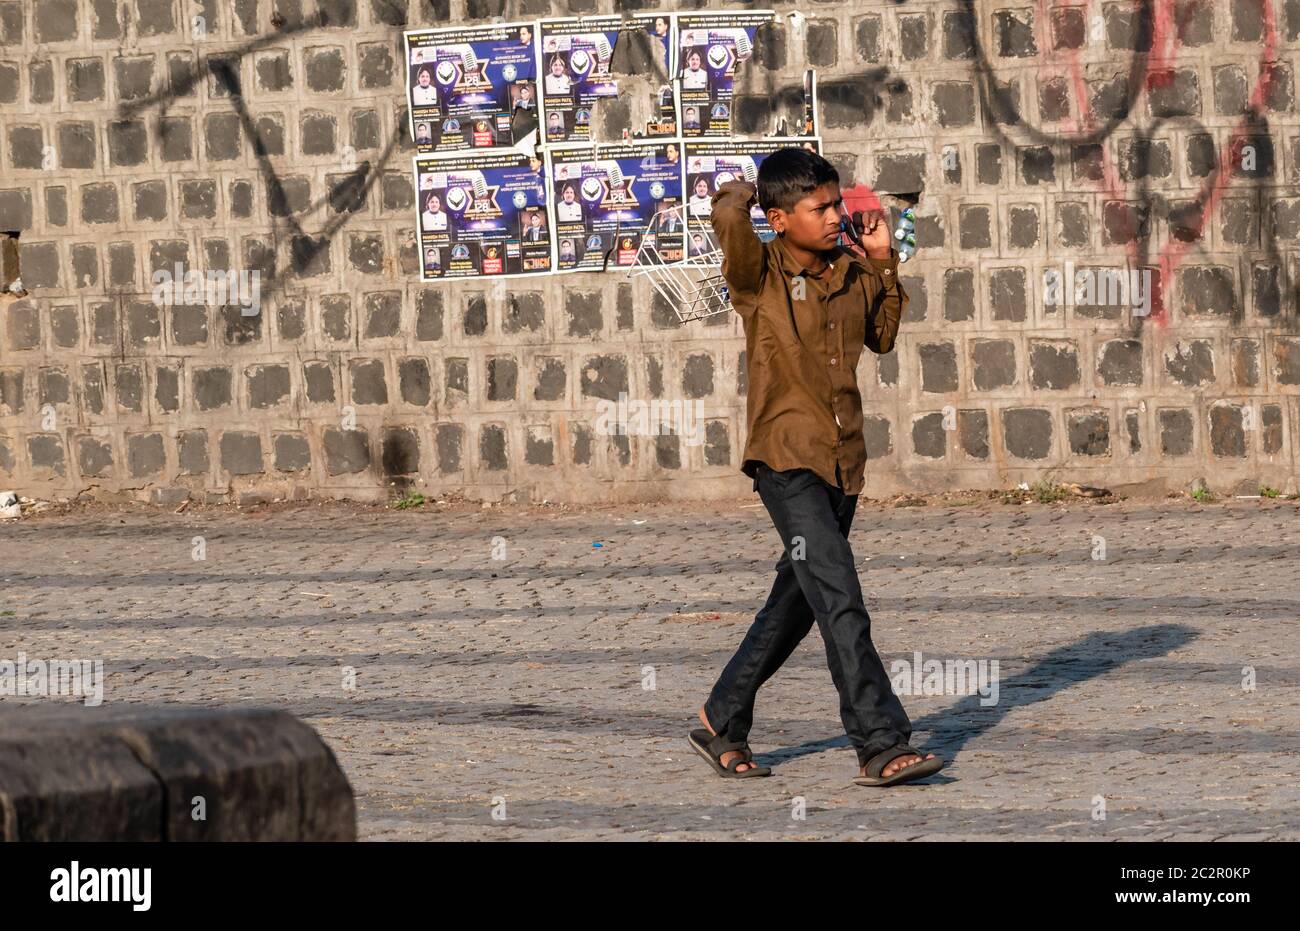 Nagpur, Maharahstra, India - March 2019: An Indian boy working on the streets of the city. Stock Photo